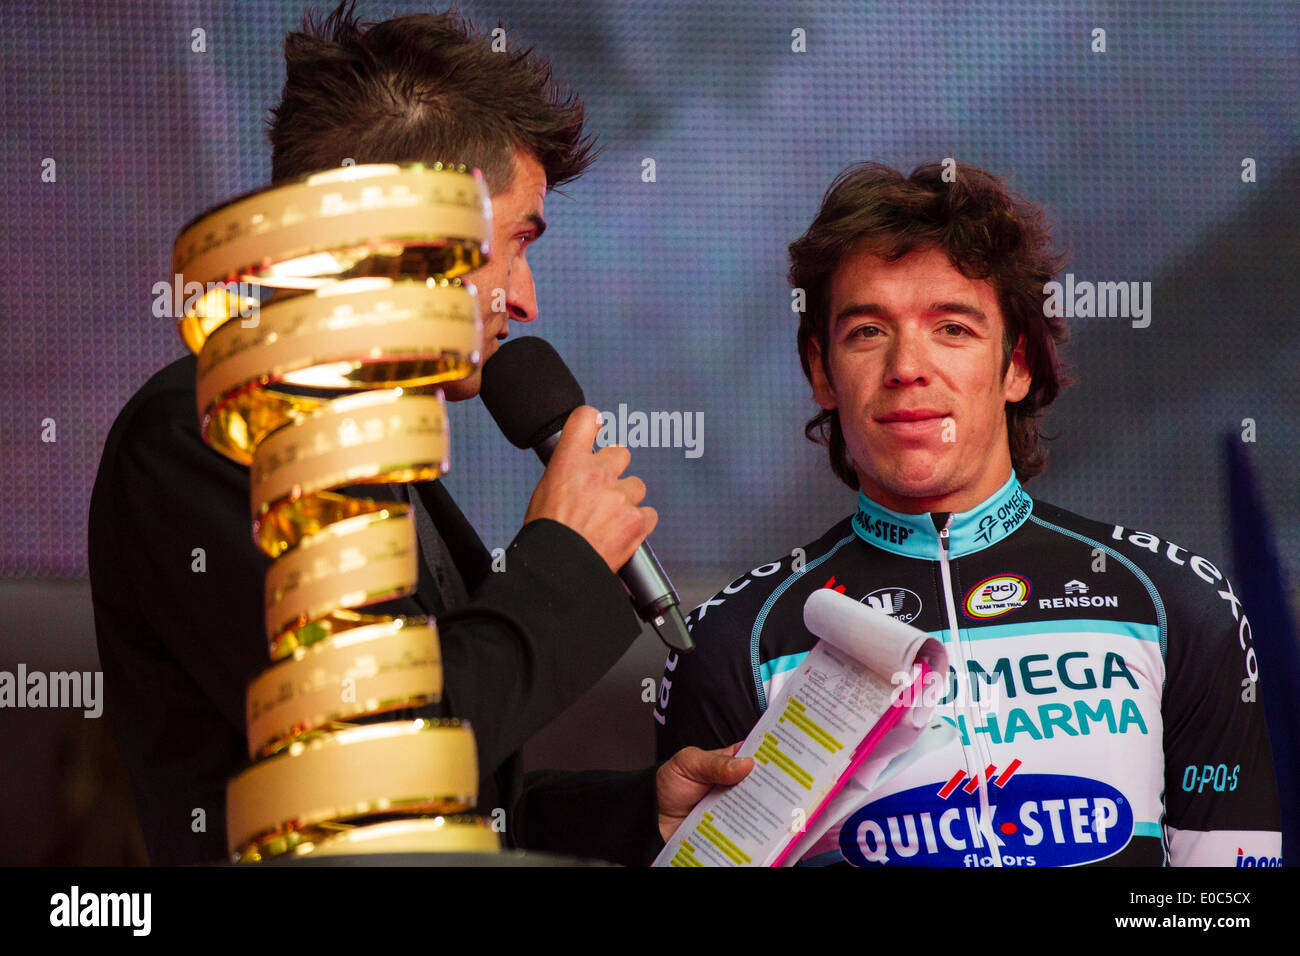 Belfast, N.Ireland. 8th May 2014. Rigoberto URAN, team leader of Omega Pharma - Quick-Step, interviewed during the Opening Ceremony for the Big Start of the Giro d'Italia from Belfast City Hall. Credit:  Action Plus Sports Images/Alamy Live News Stock Photo